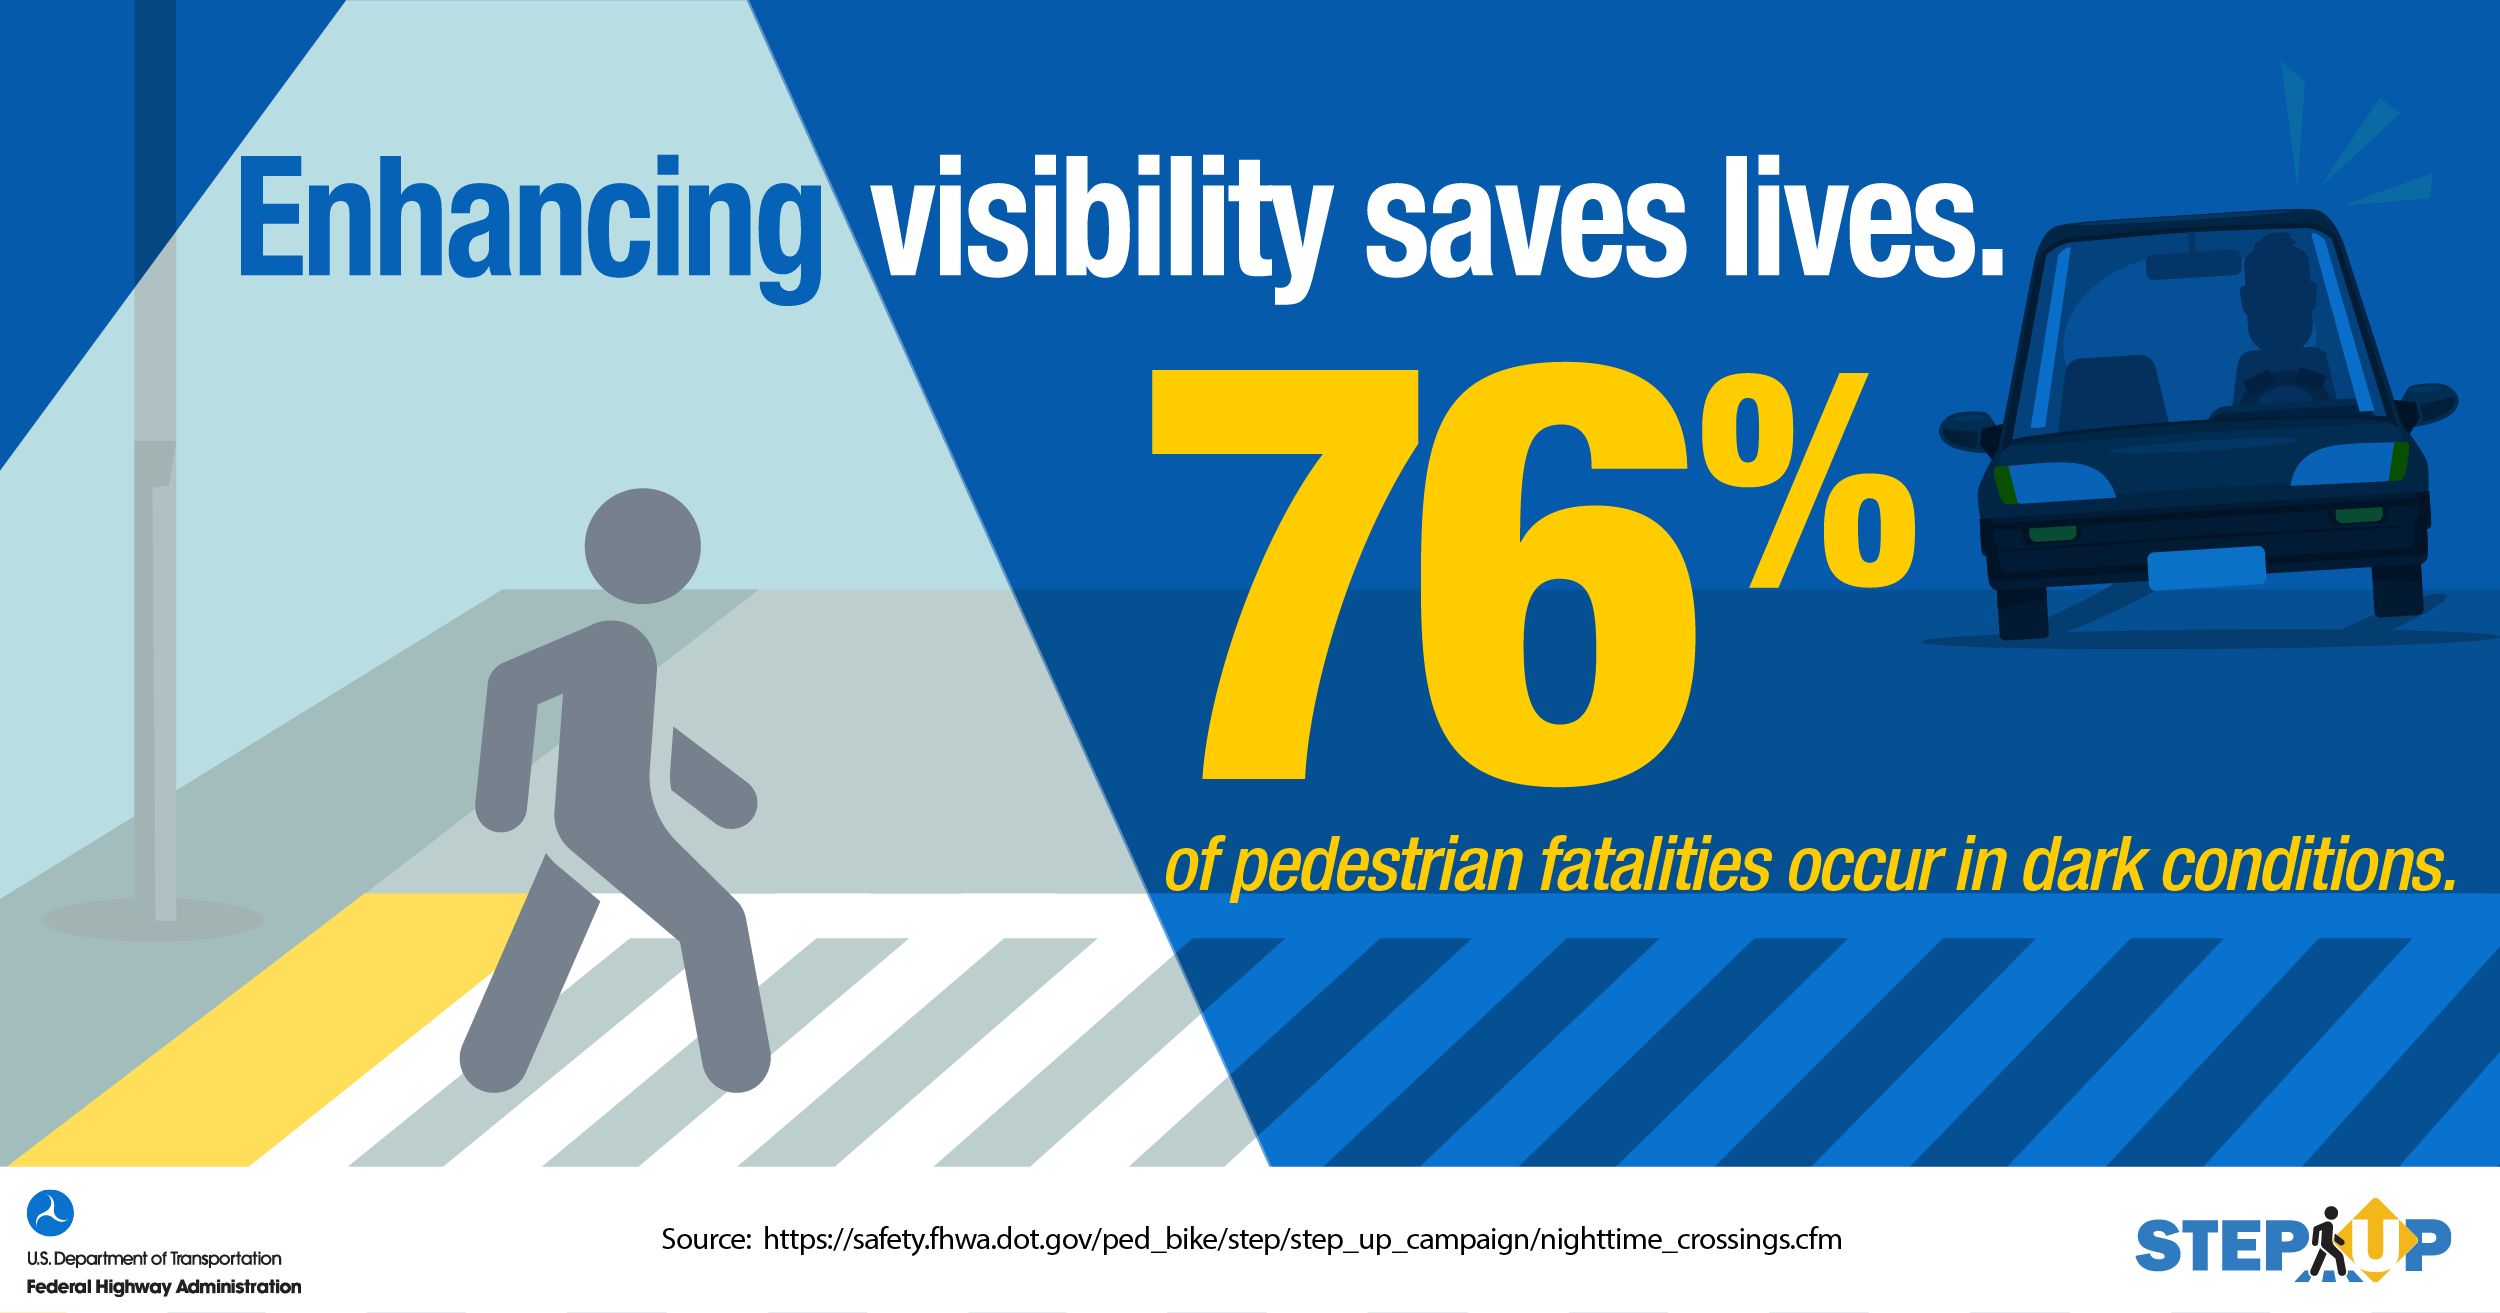 STEP infographic with a pedestrian in a spotlight, safely crossing the street. “Enhancing visibility saves lives. 76% of pedestrian fatalities occur in dark conditions.”